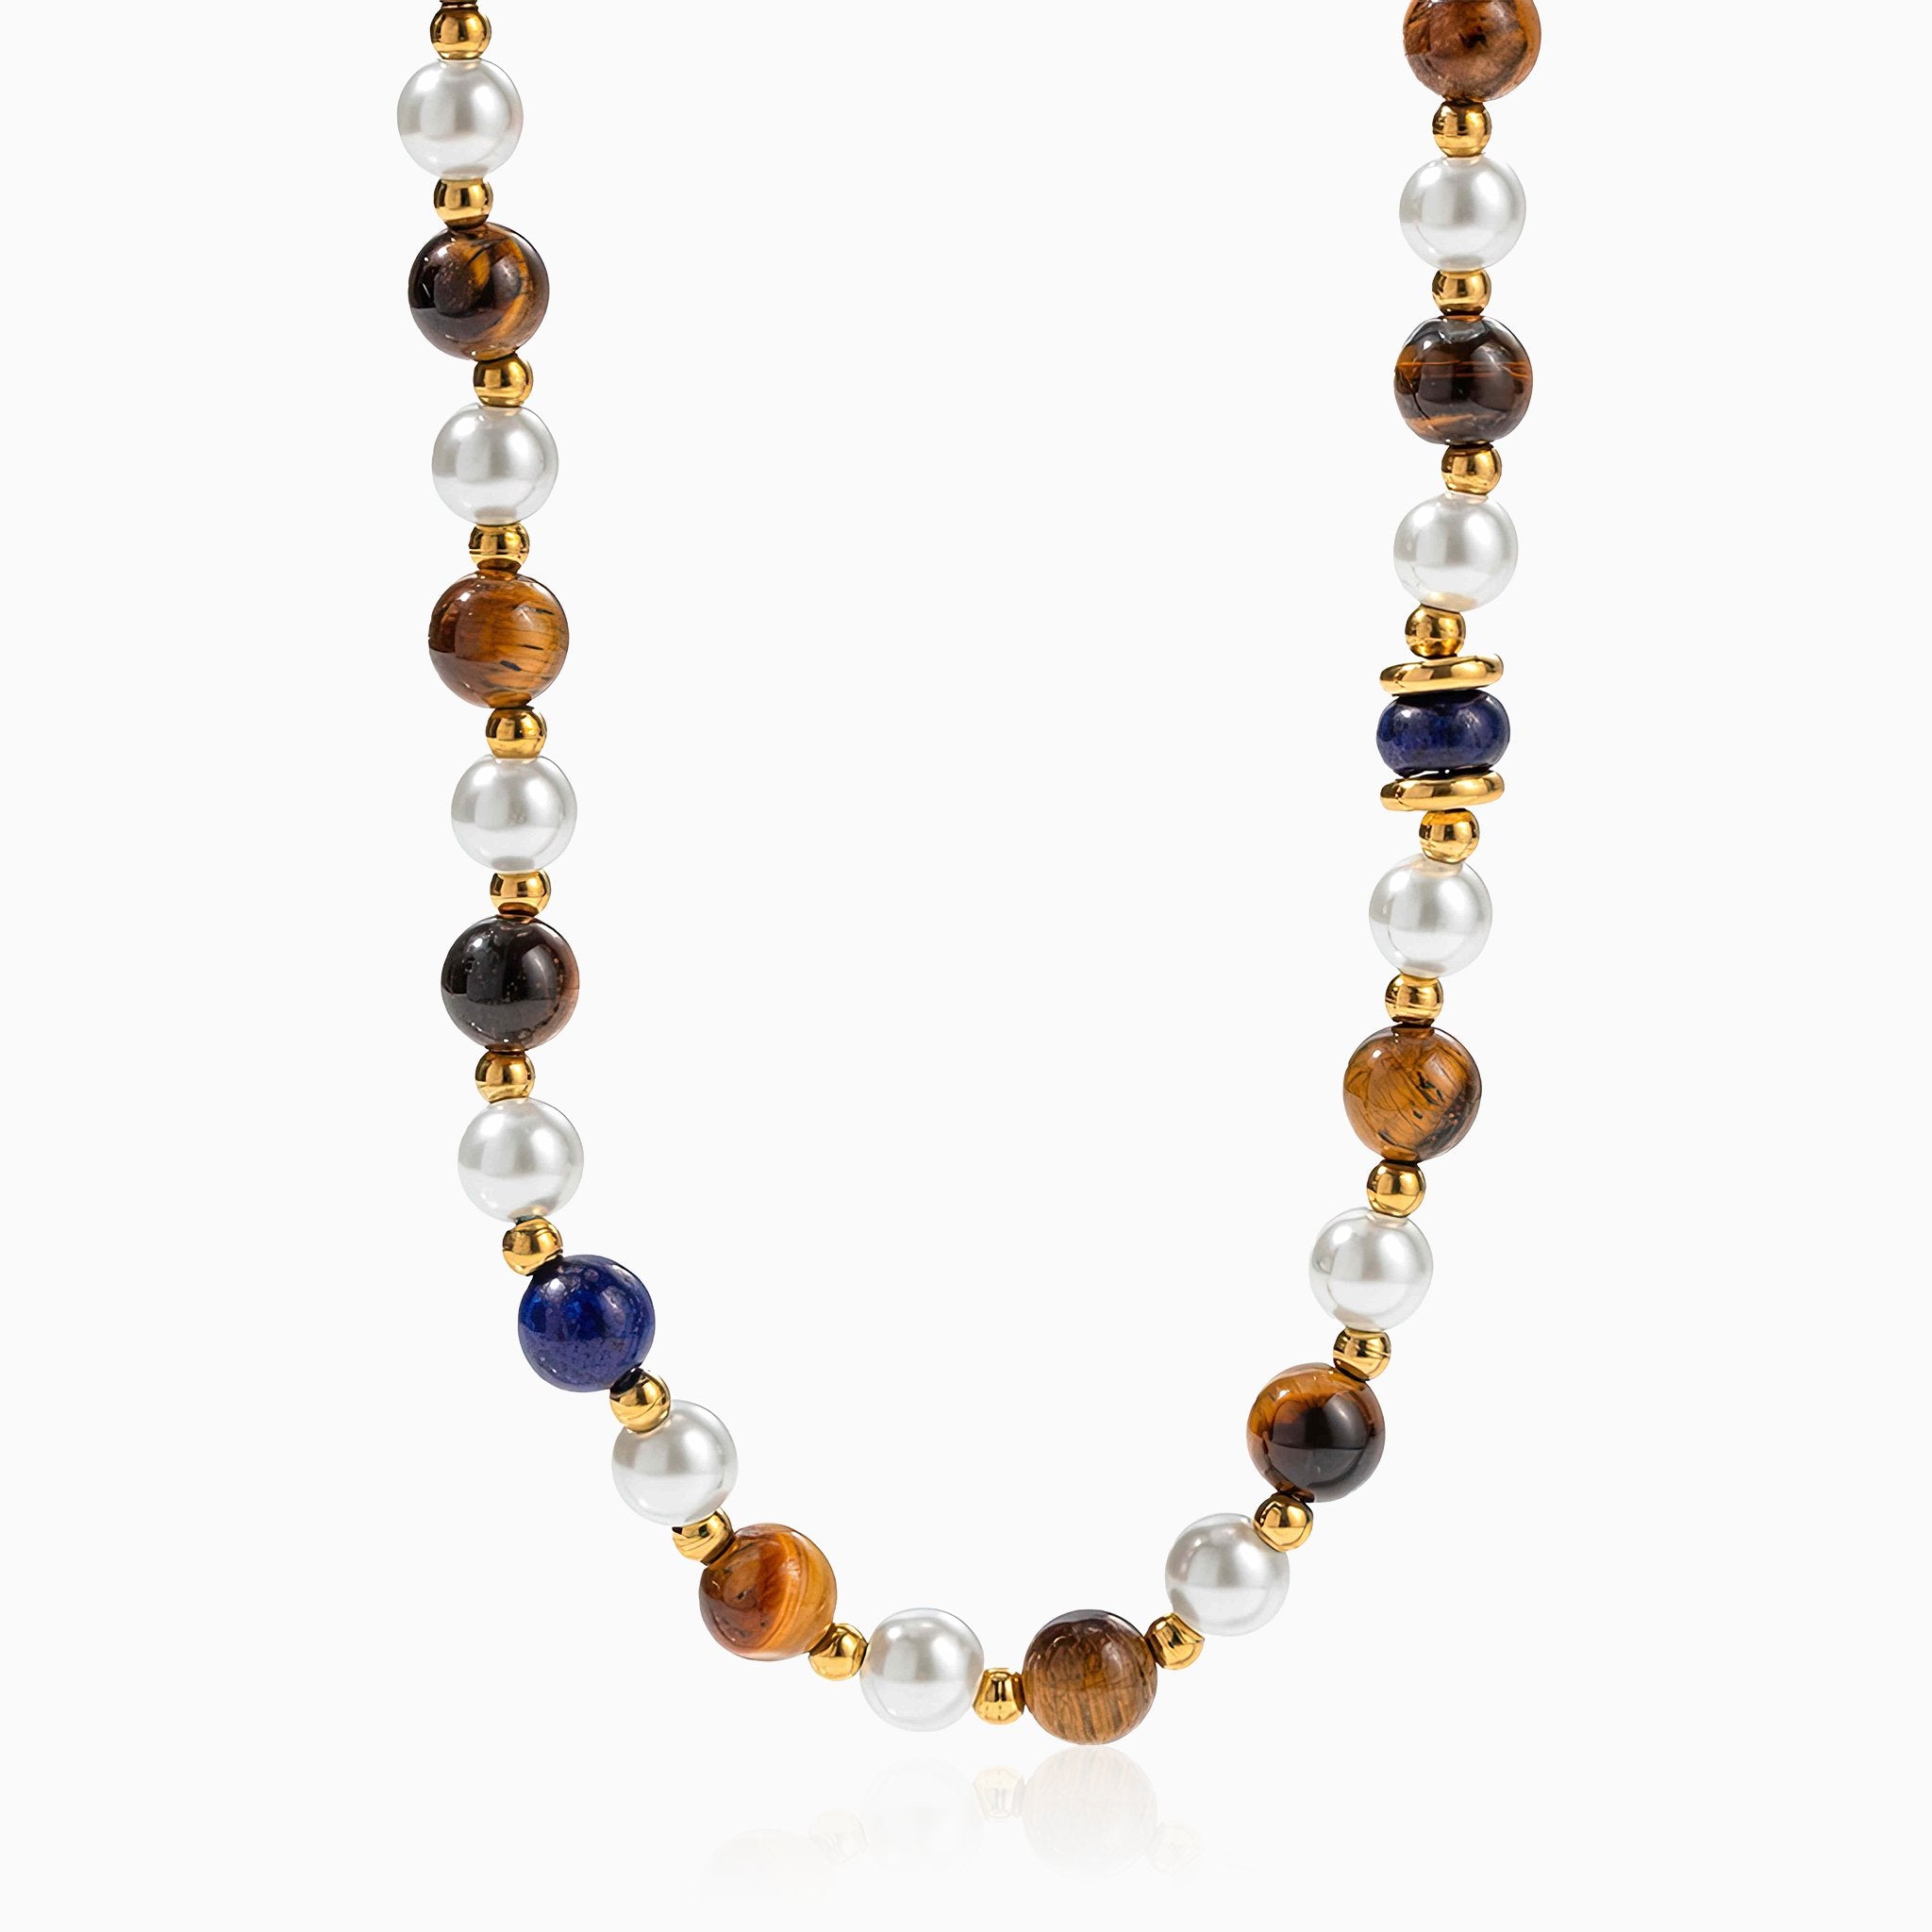 Multi-Gem Noble Necklace - Nobbier - Necklace - 18K Gold And Titanium PVD Coated Jewelry